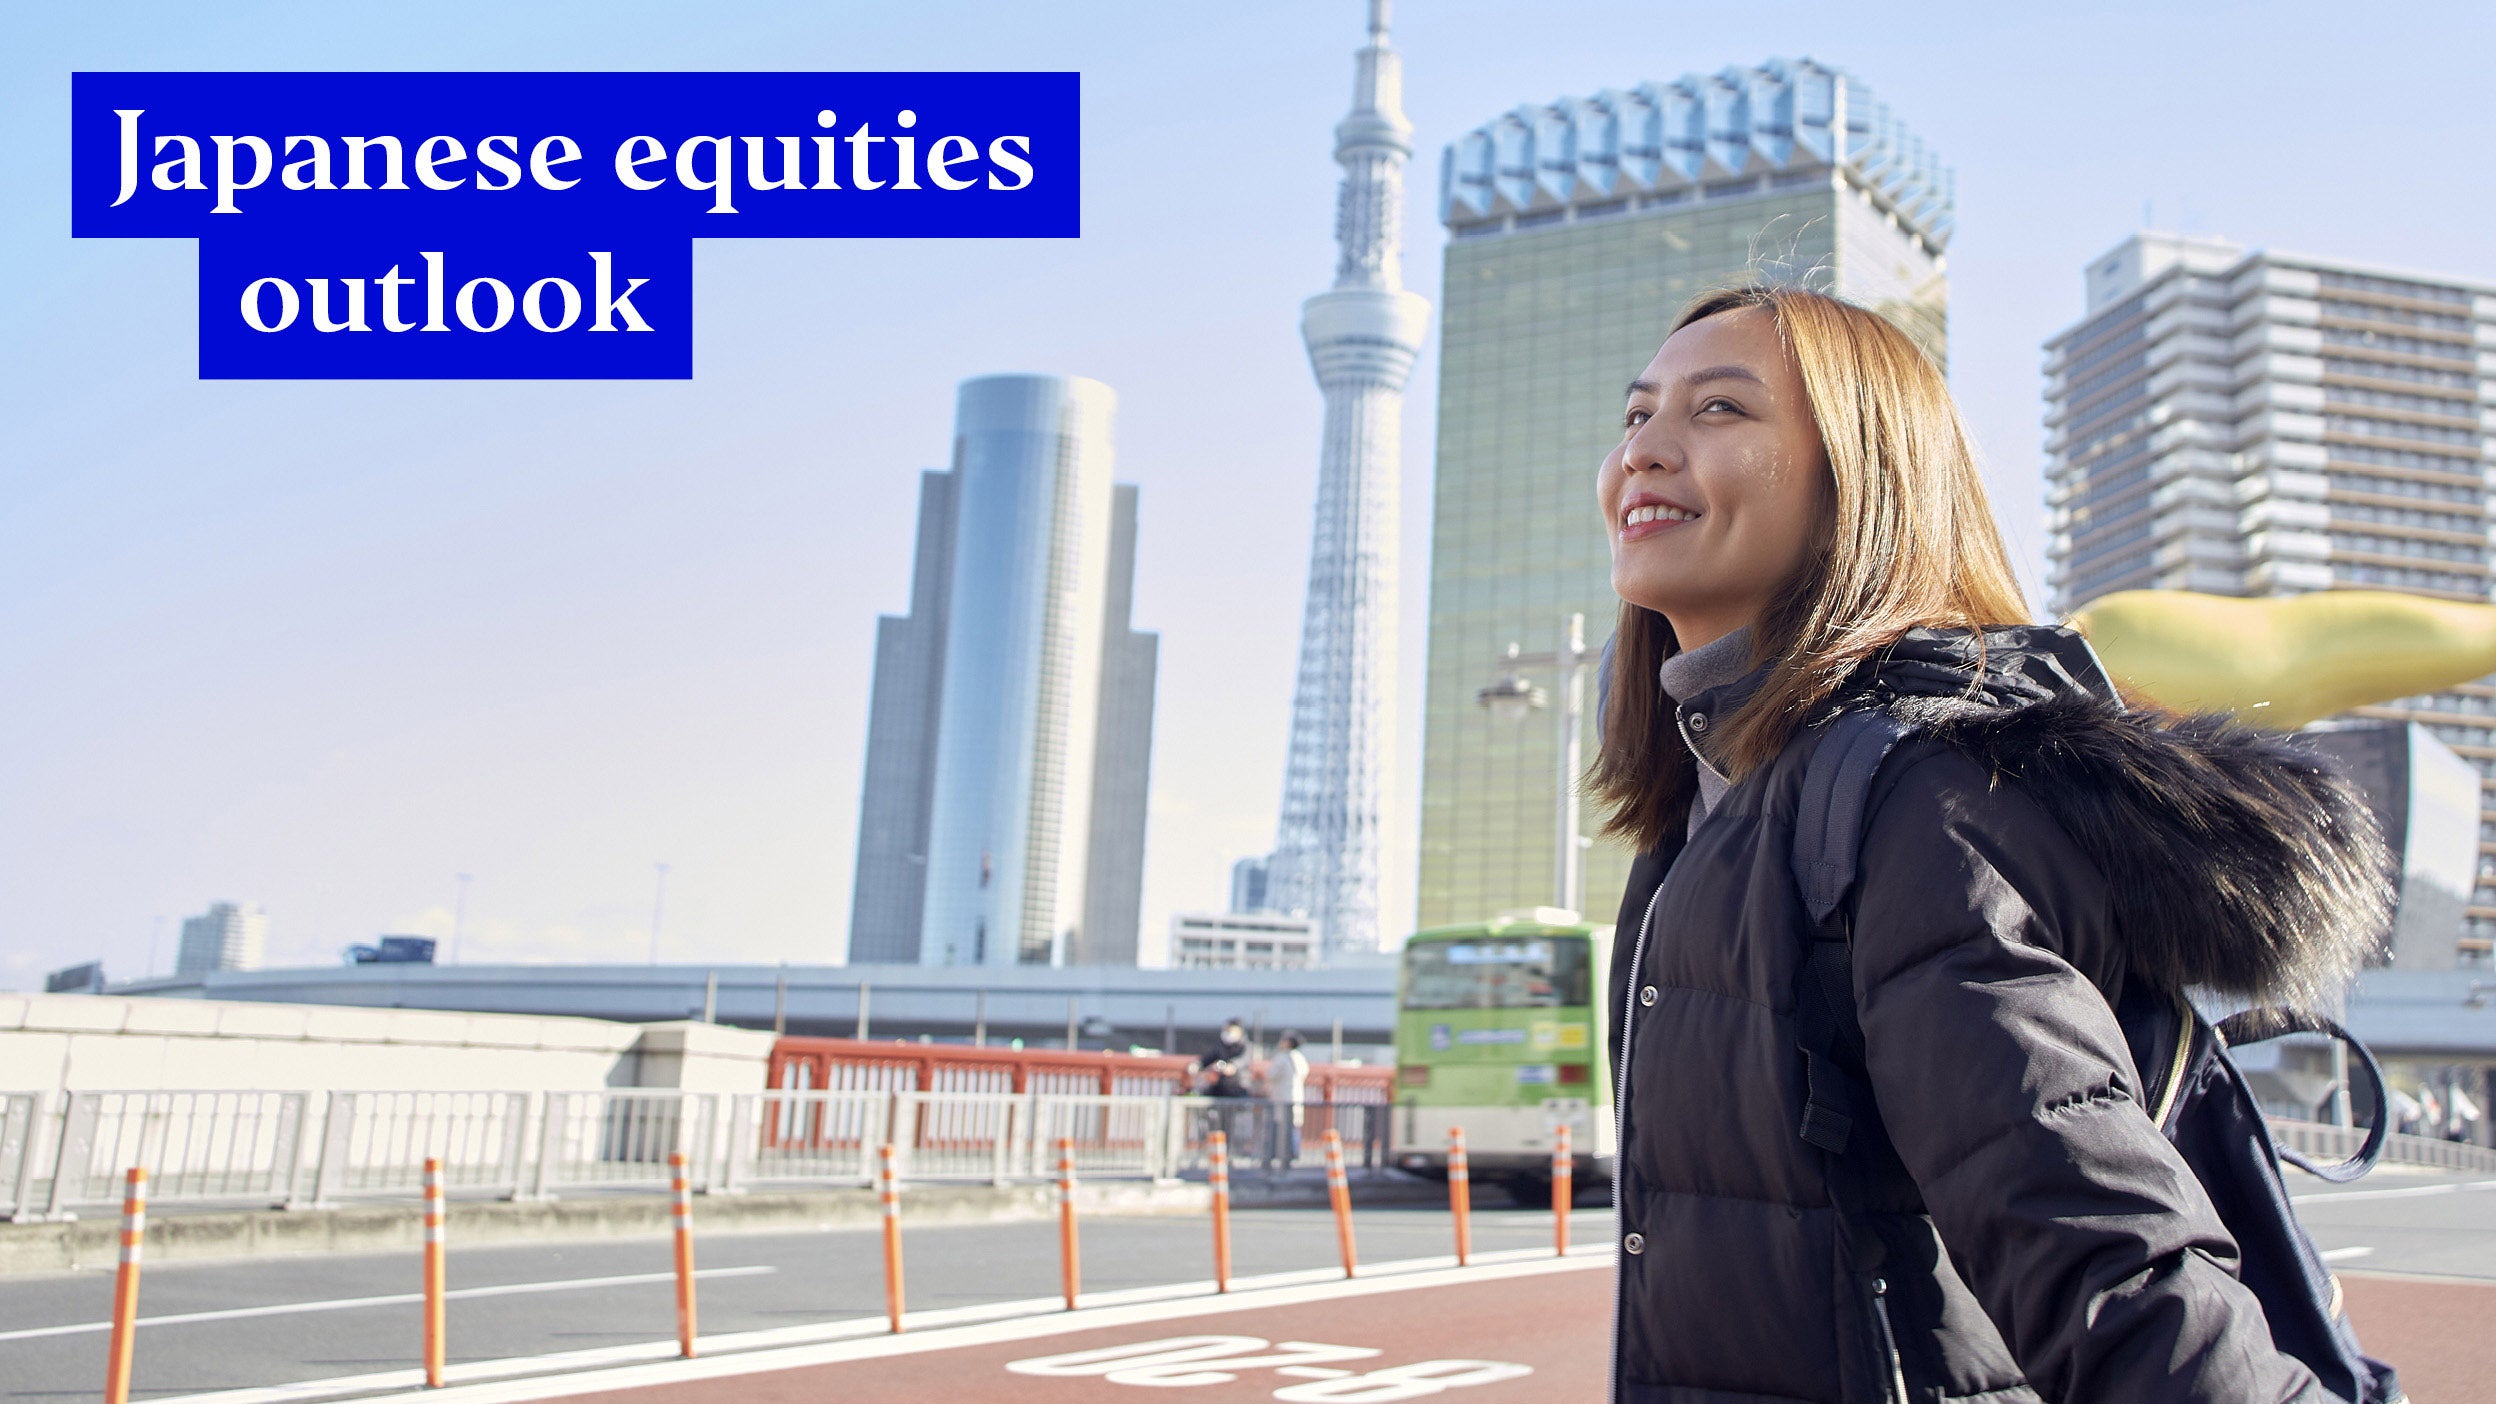 Japanese equities outlook